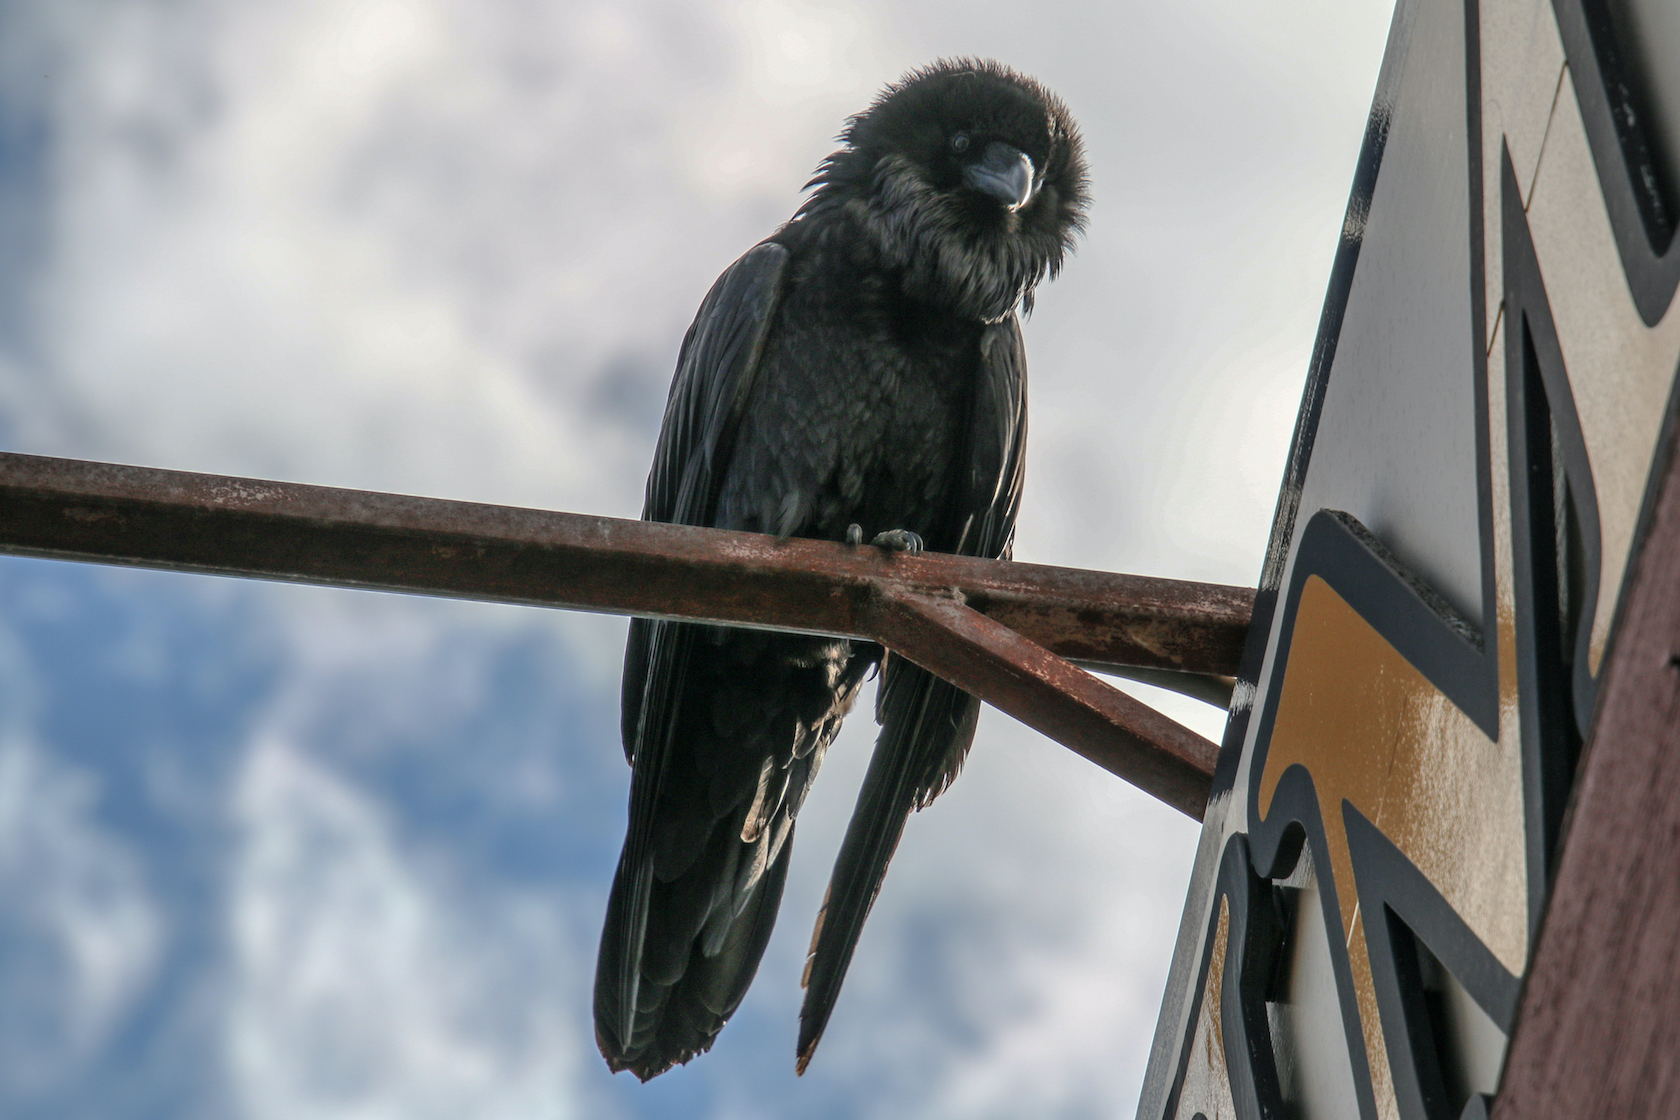 A raven sits on a metal brace above a sign, looking down at the photographer with a partly cloudy sky in the background.